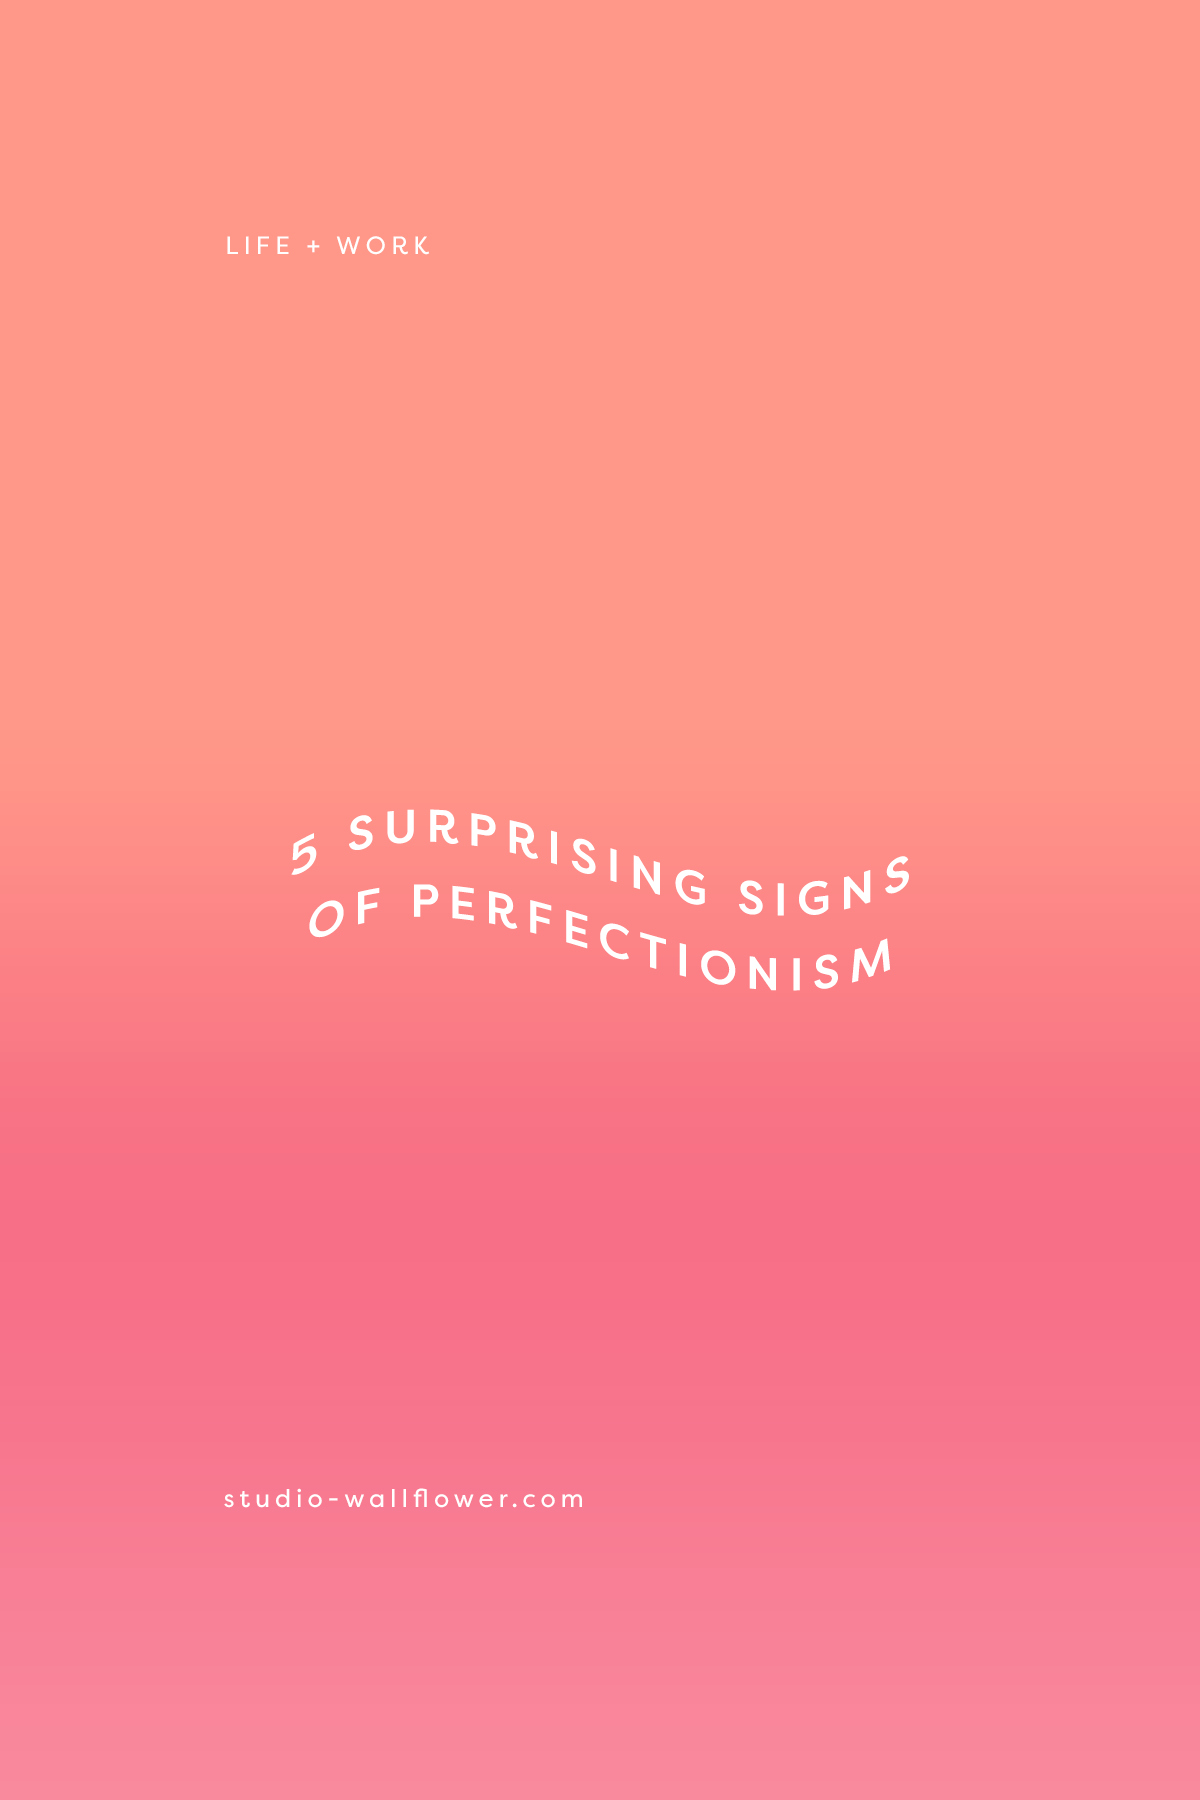 5 surprising signs of perfectionism by studio wallflower